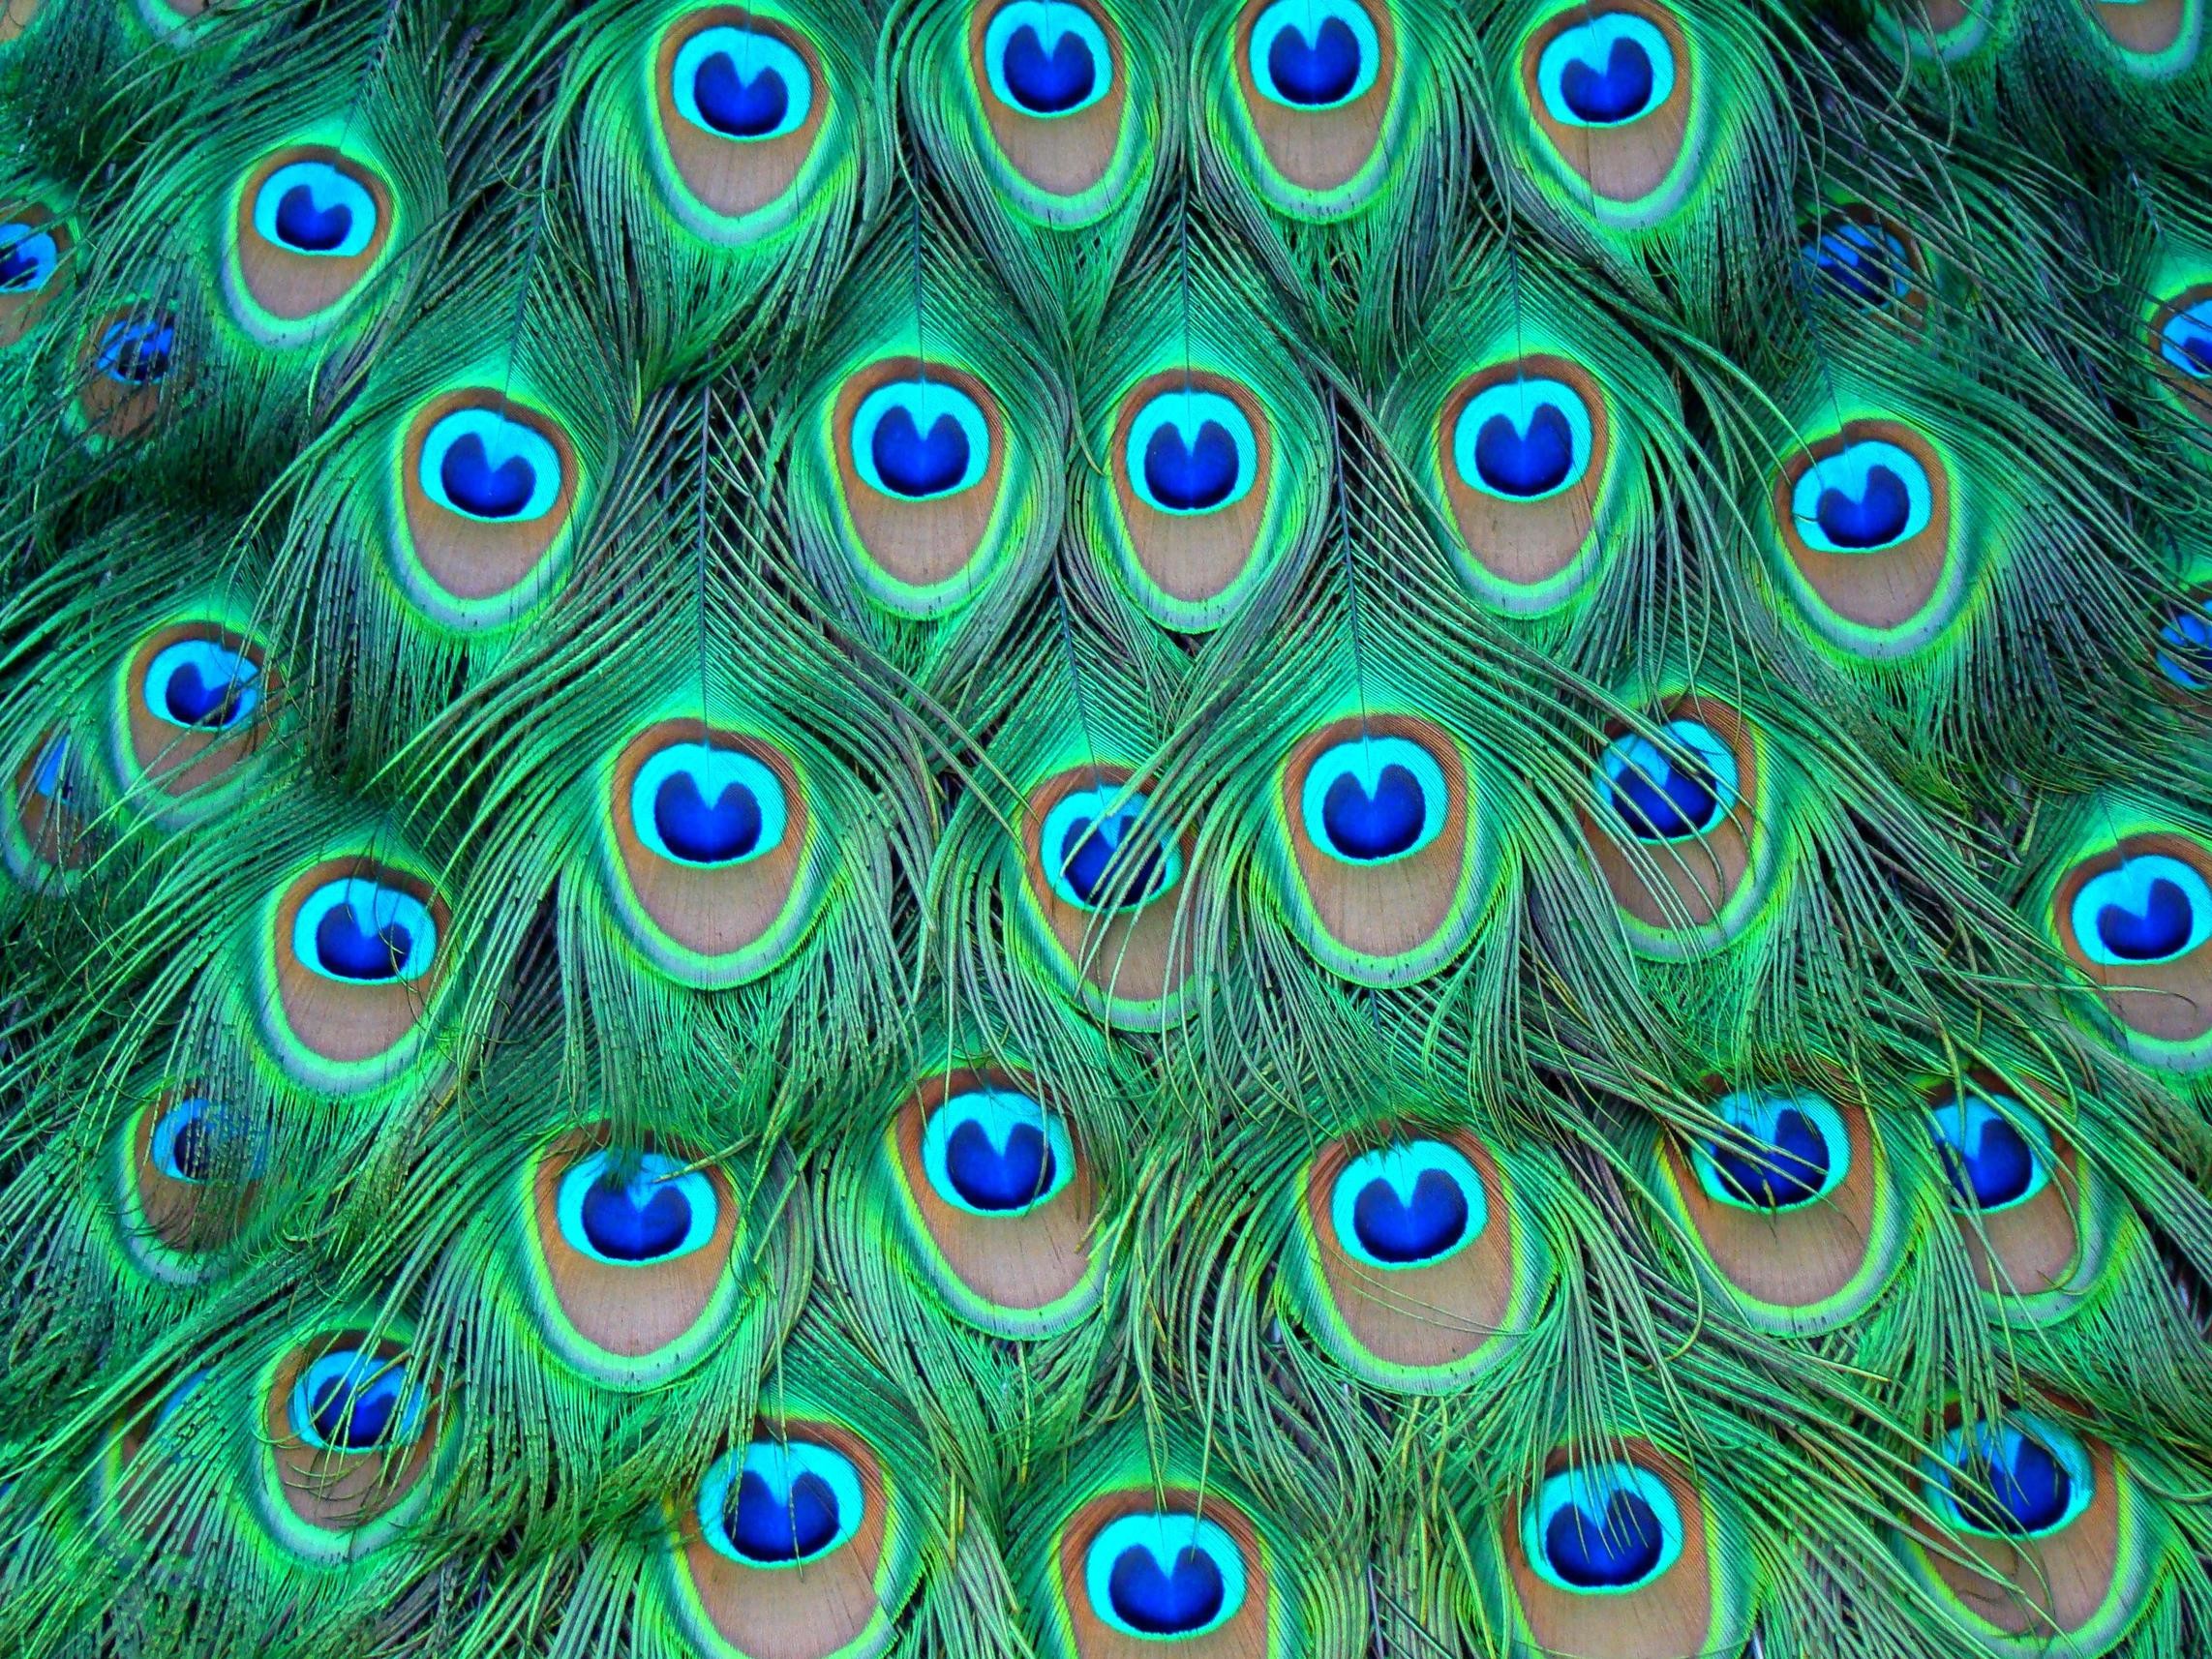 2285x1714 widescreen natural hd image. colorful peacock background